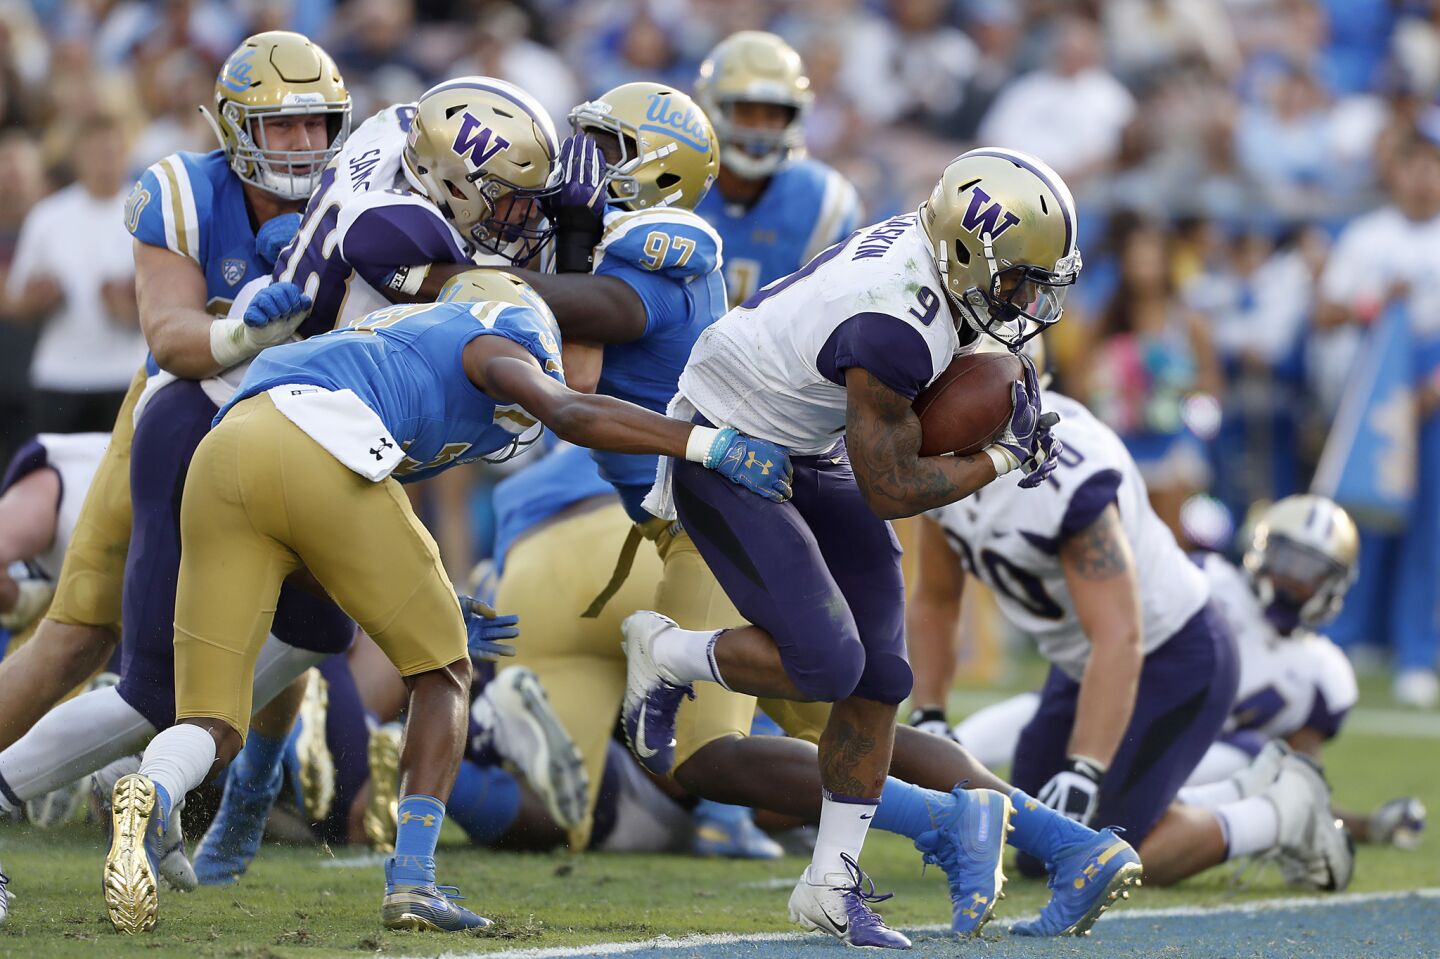 Washington tailback Myles Gaskin scores a touchdown against UCLA in the second quarter on Saturday at the Rose Bowl.